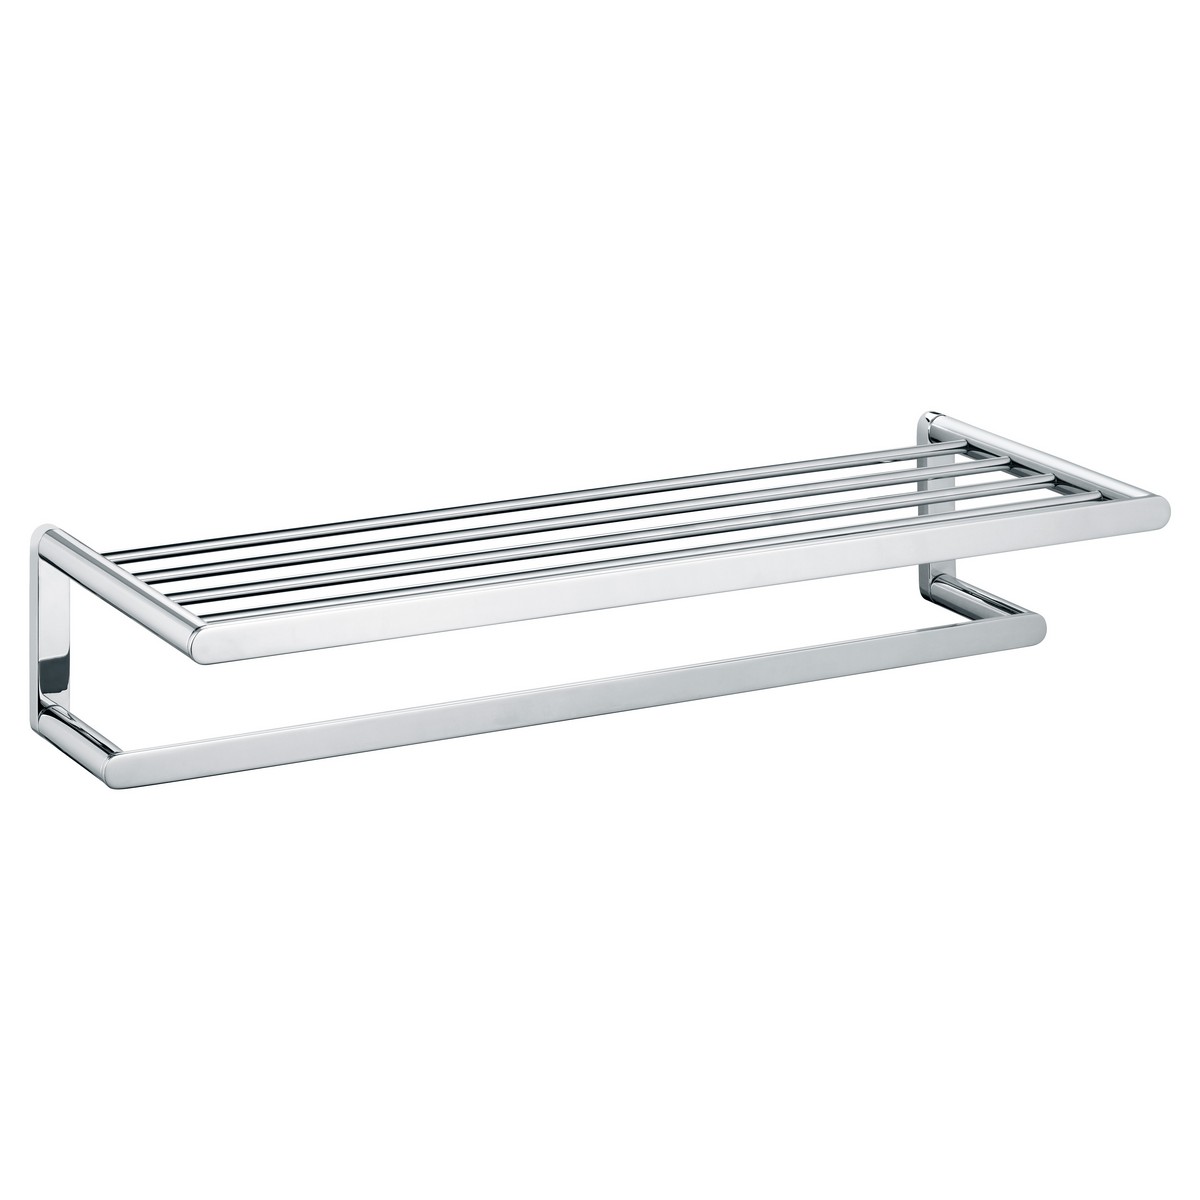 KEUCO 11675010000 ELEGANCE 24 3/8 INCH WALL MOUNTED TOWEL RACK IN POLISHED CHROME